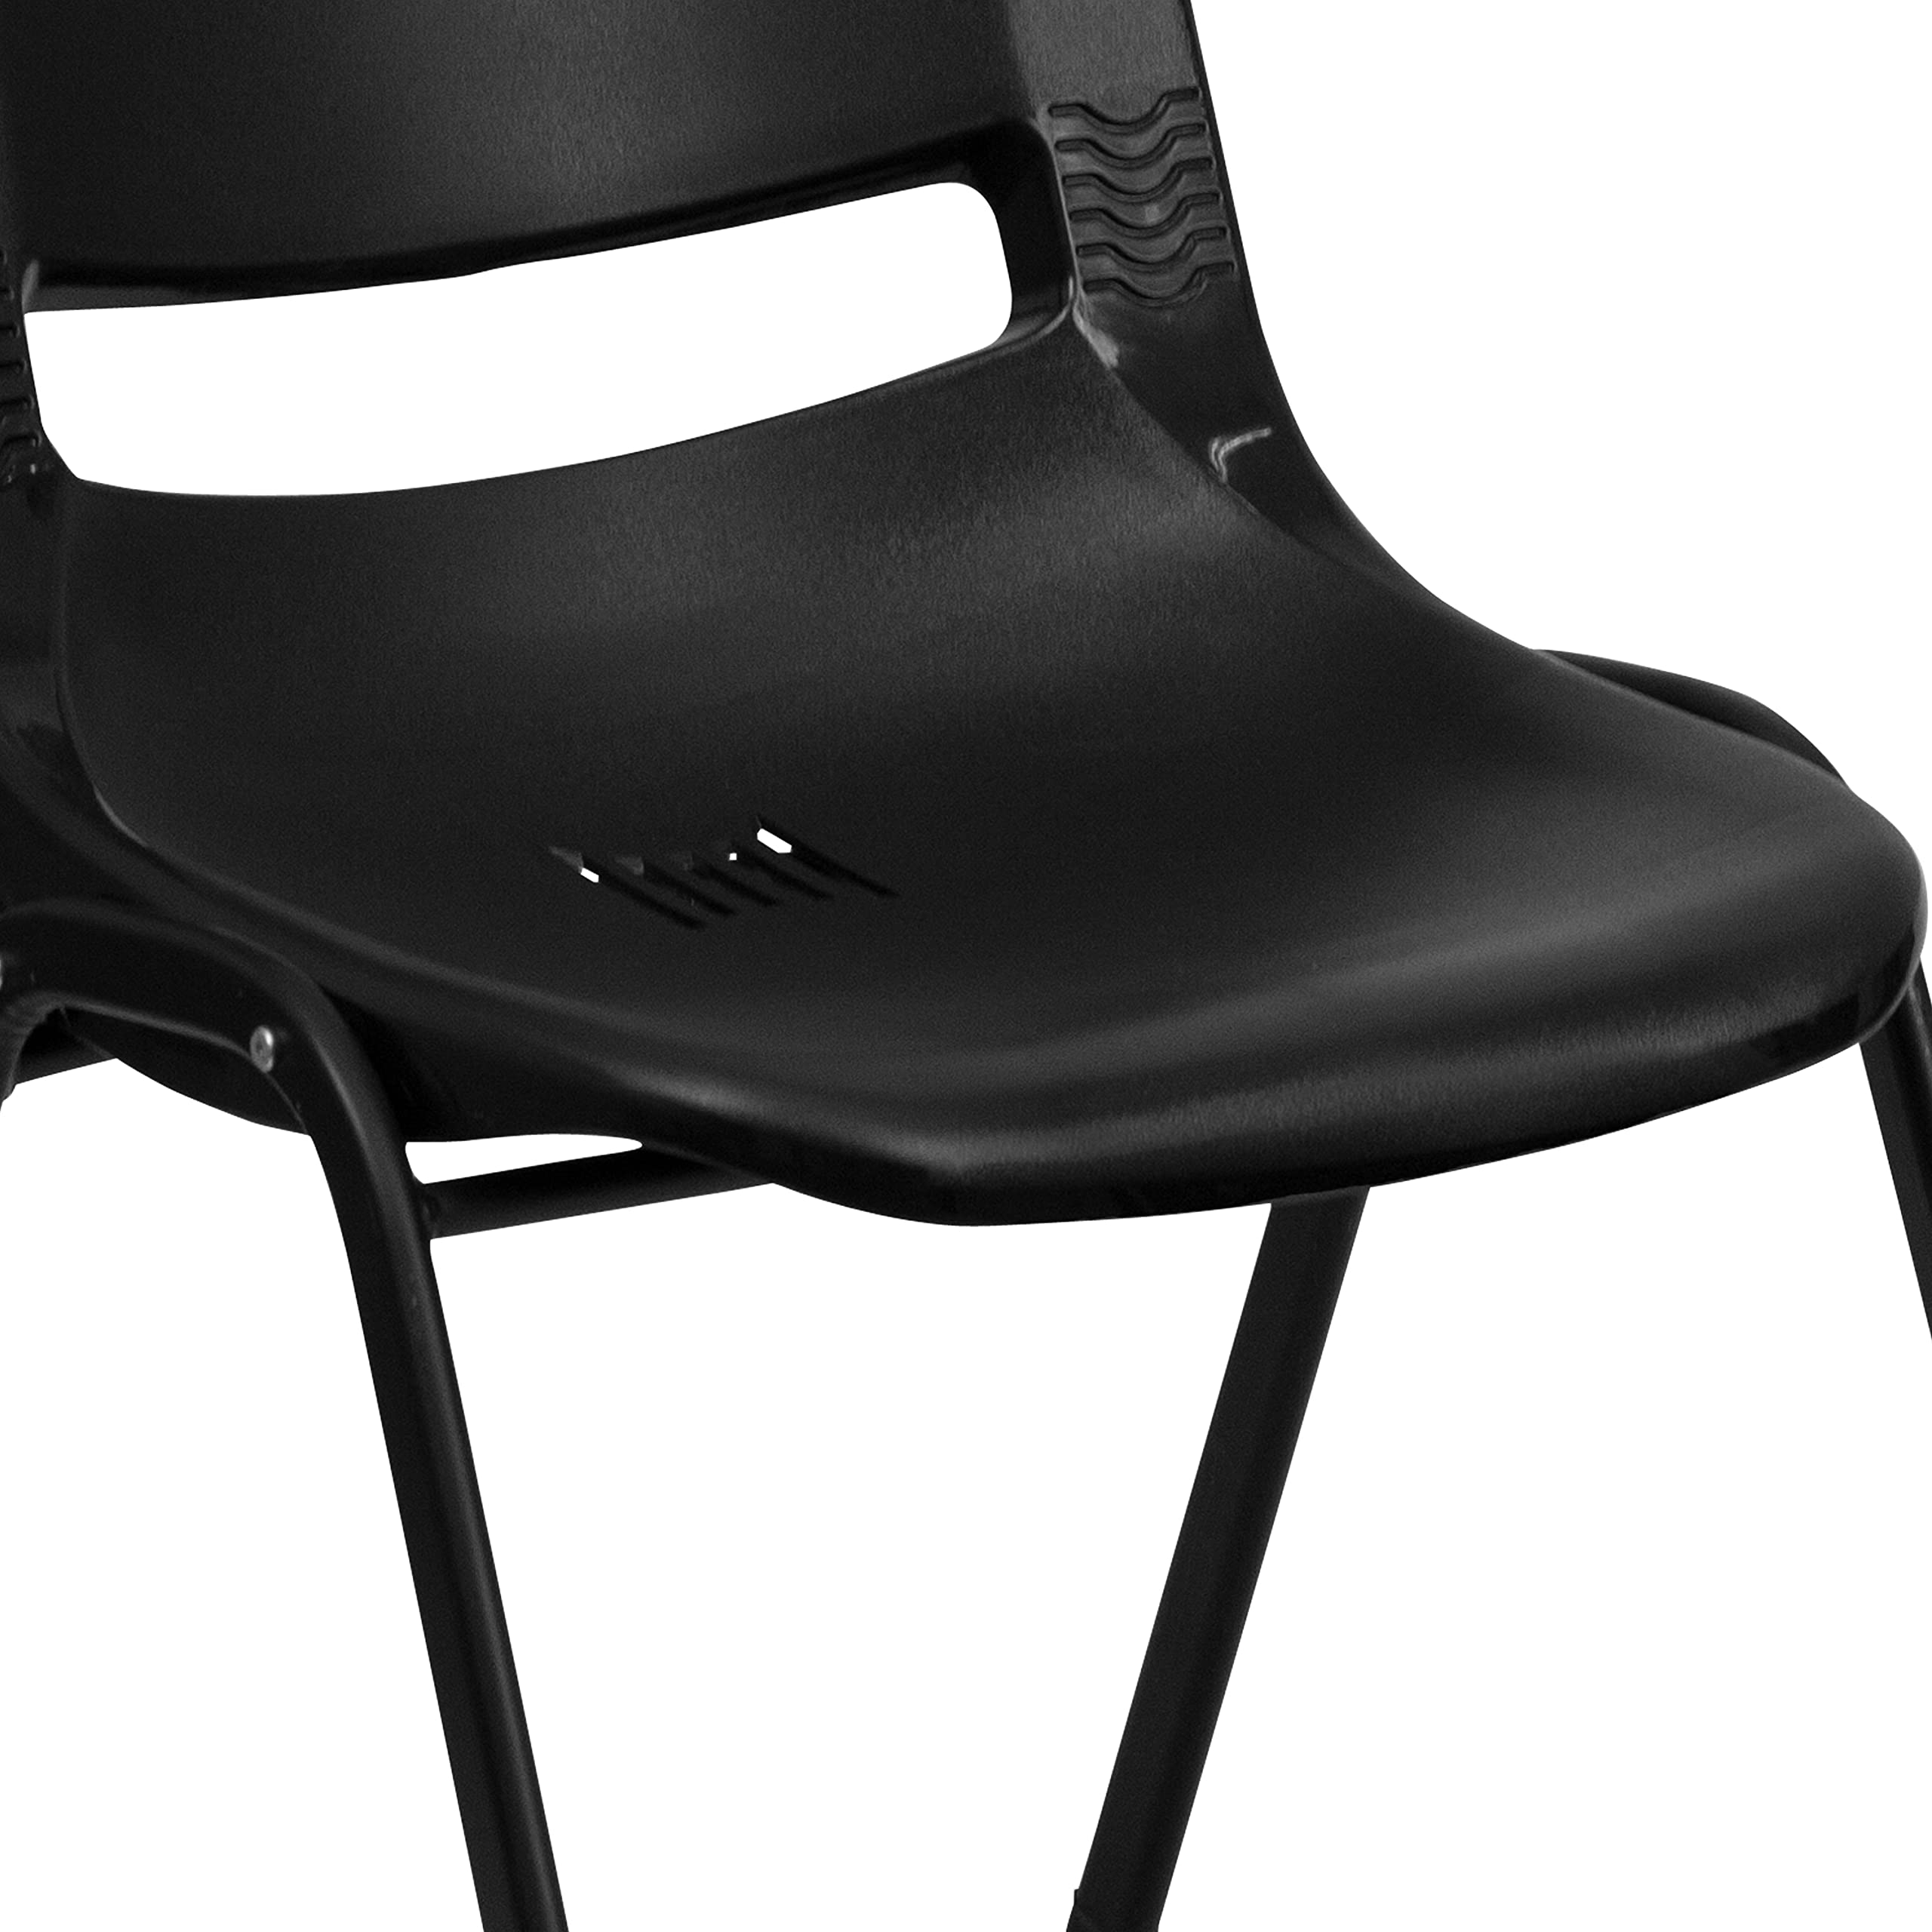 EMMA + OLIVER Black Ergonomic Shell Stack Chair with Black Frame and 16" H Seat